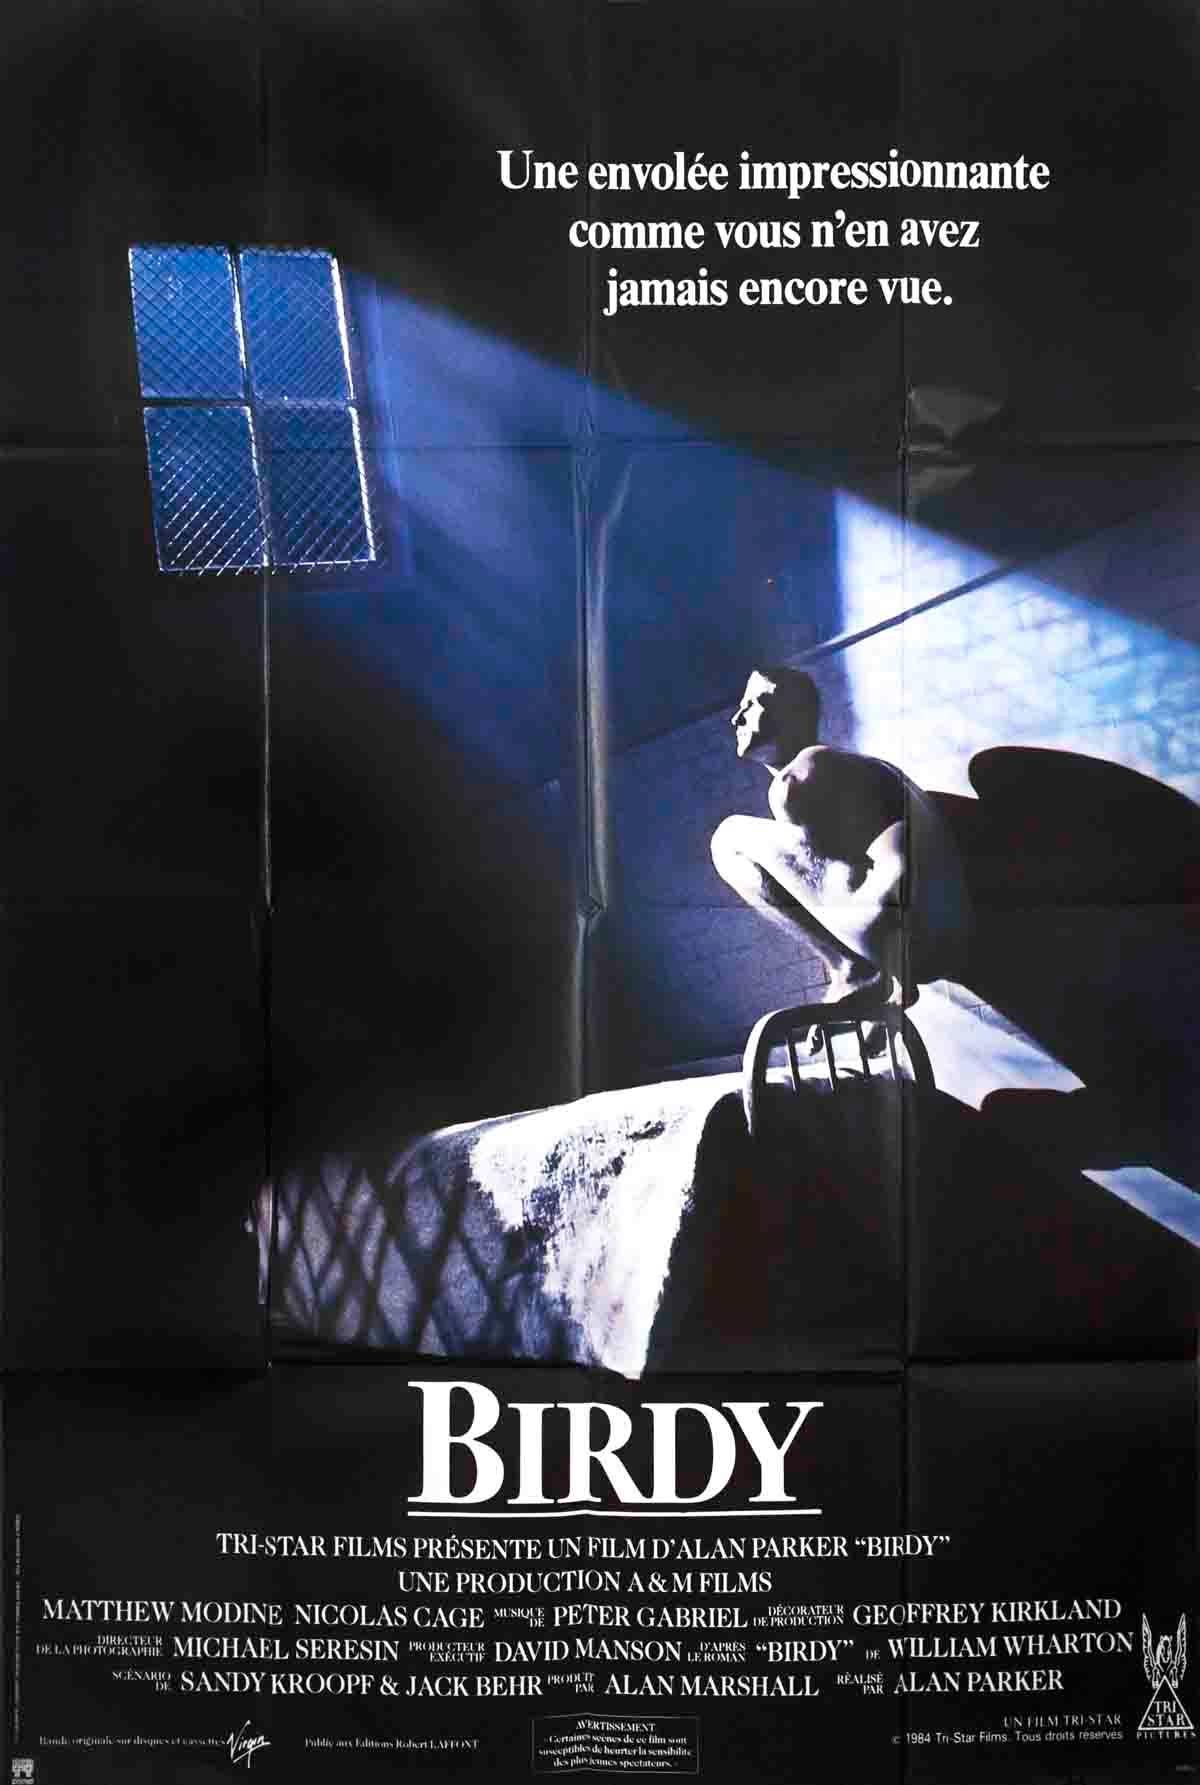 Birdy The Movie Poster-1984